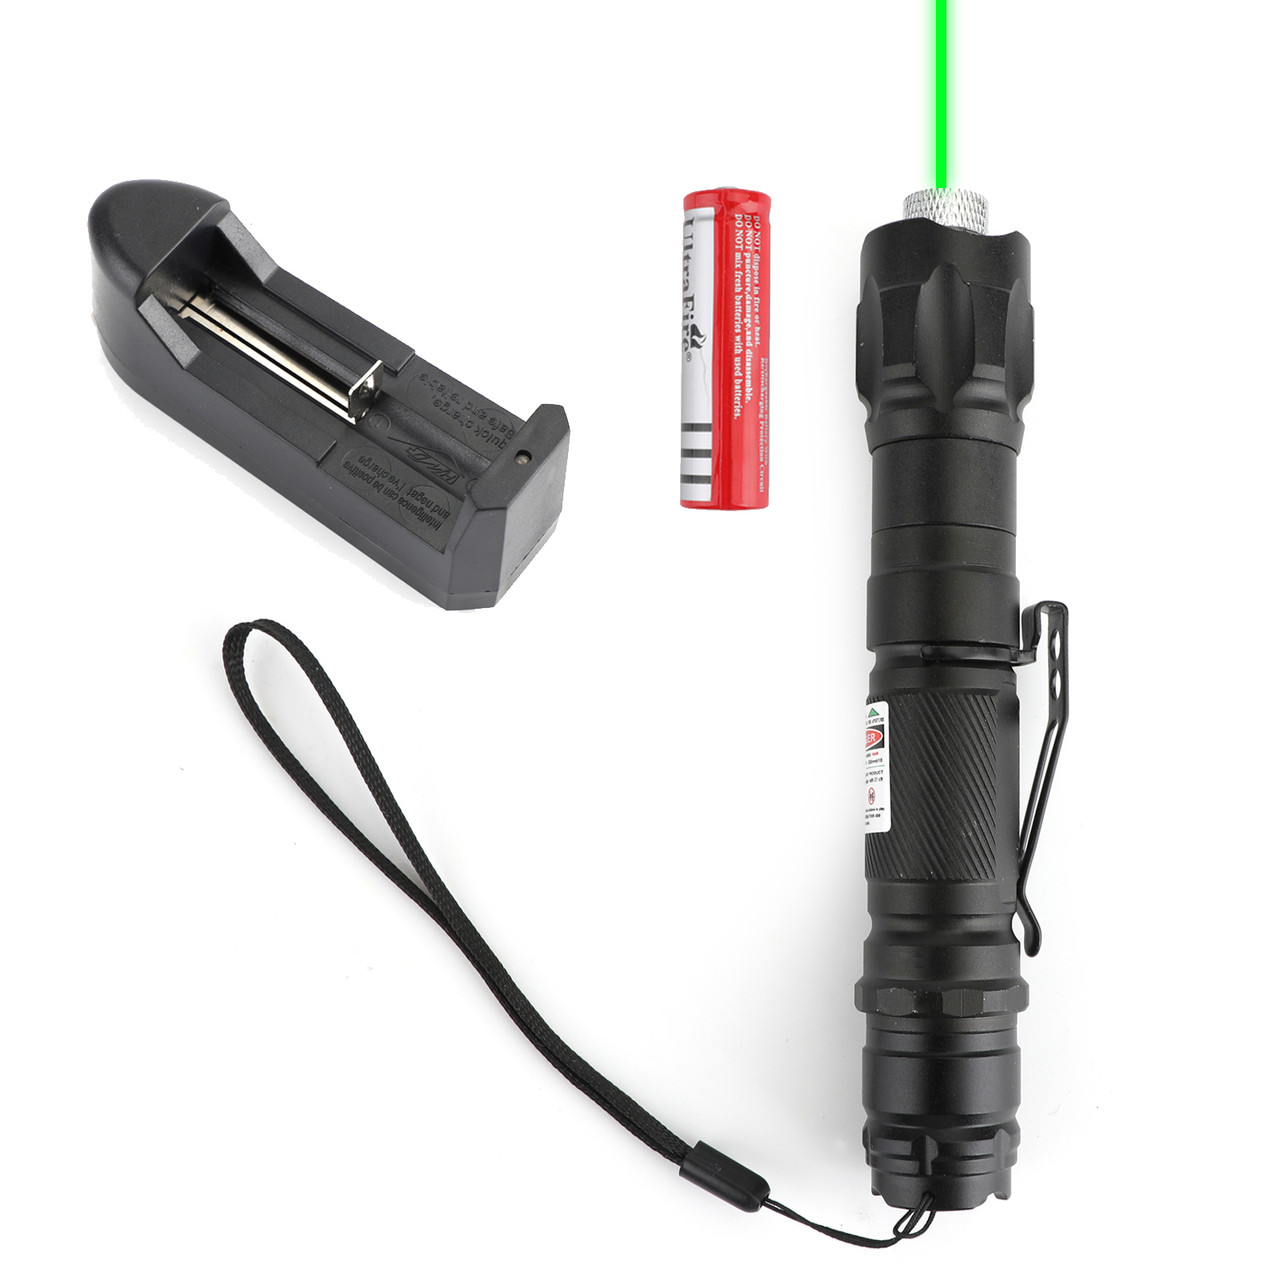 Star Cap Military 10 Miles 532nm Green Laser Pointer Pen Visible Beam Battery 